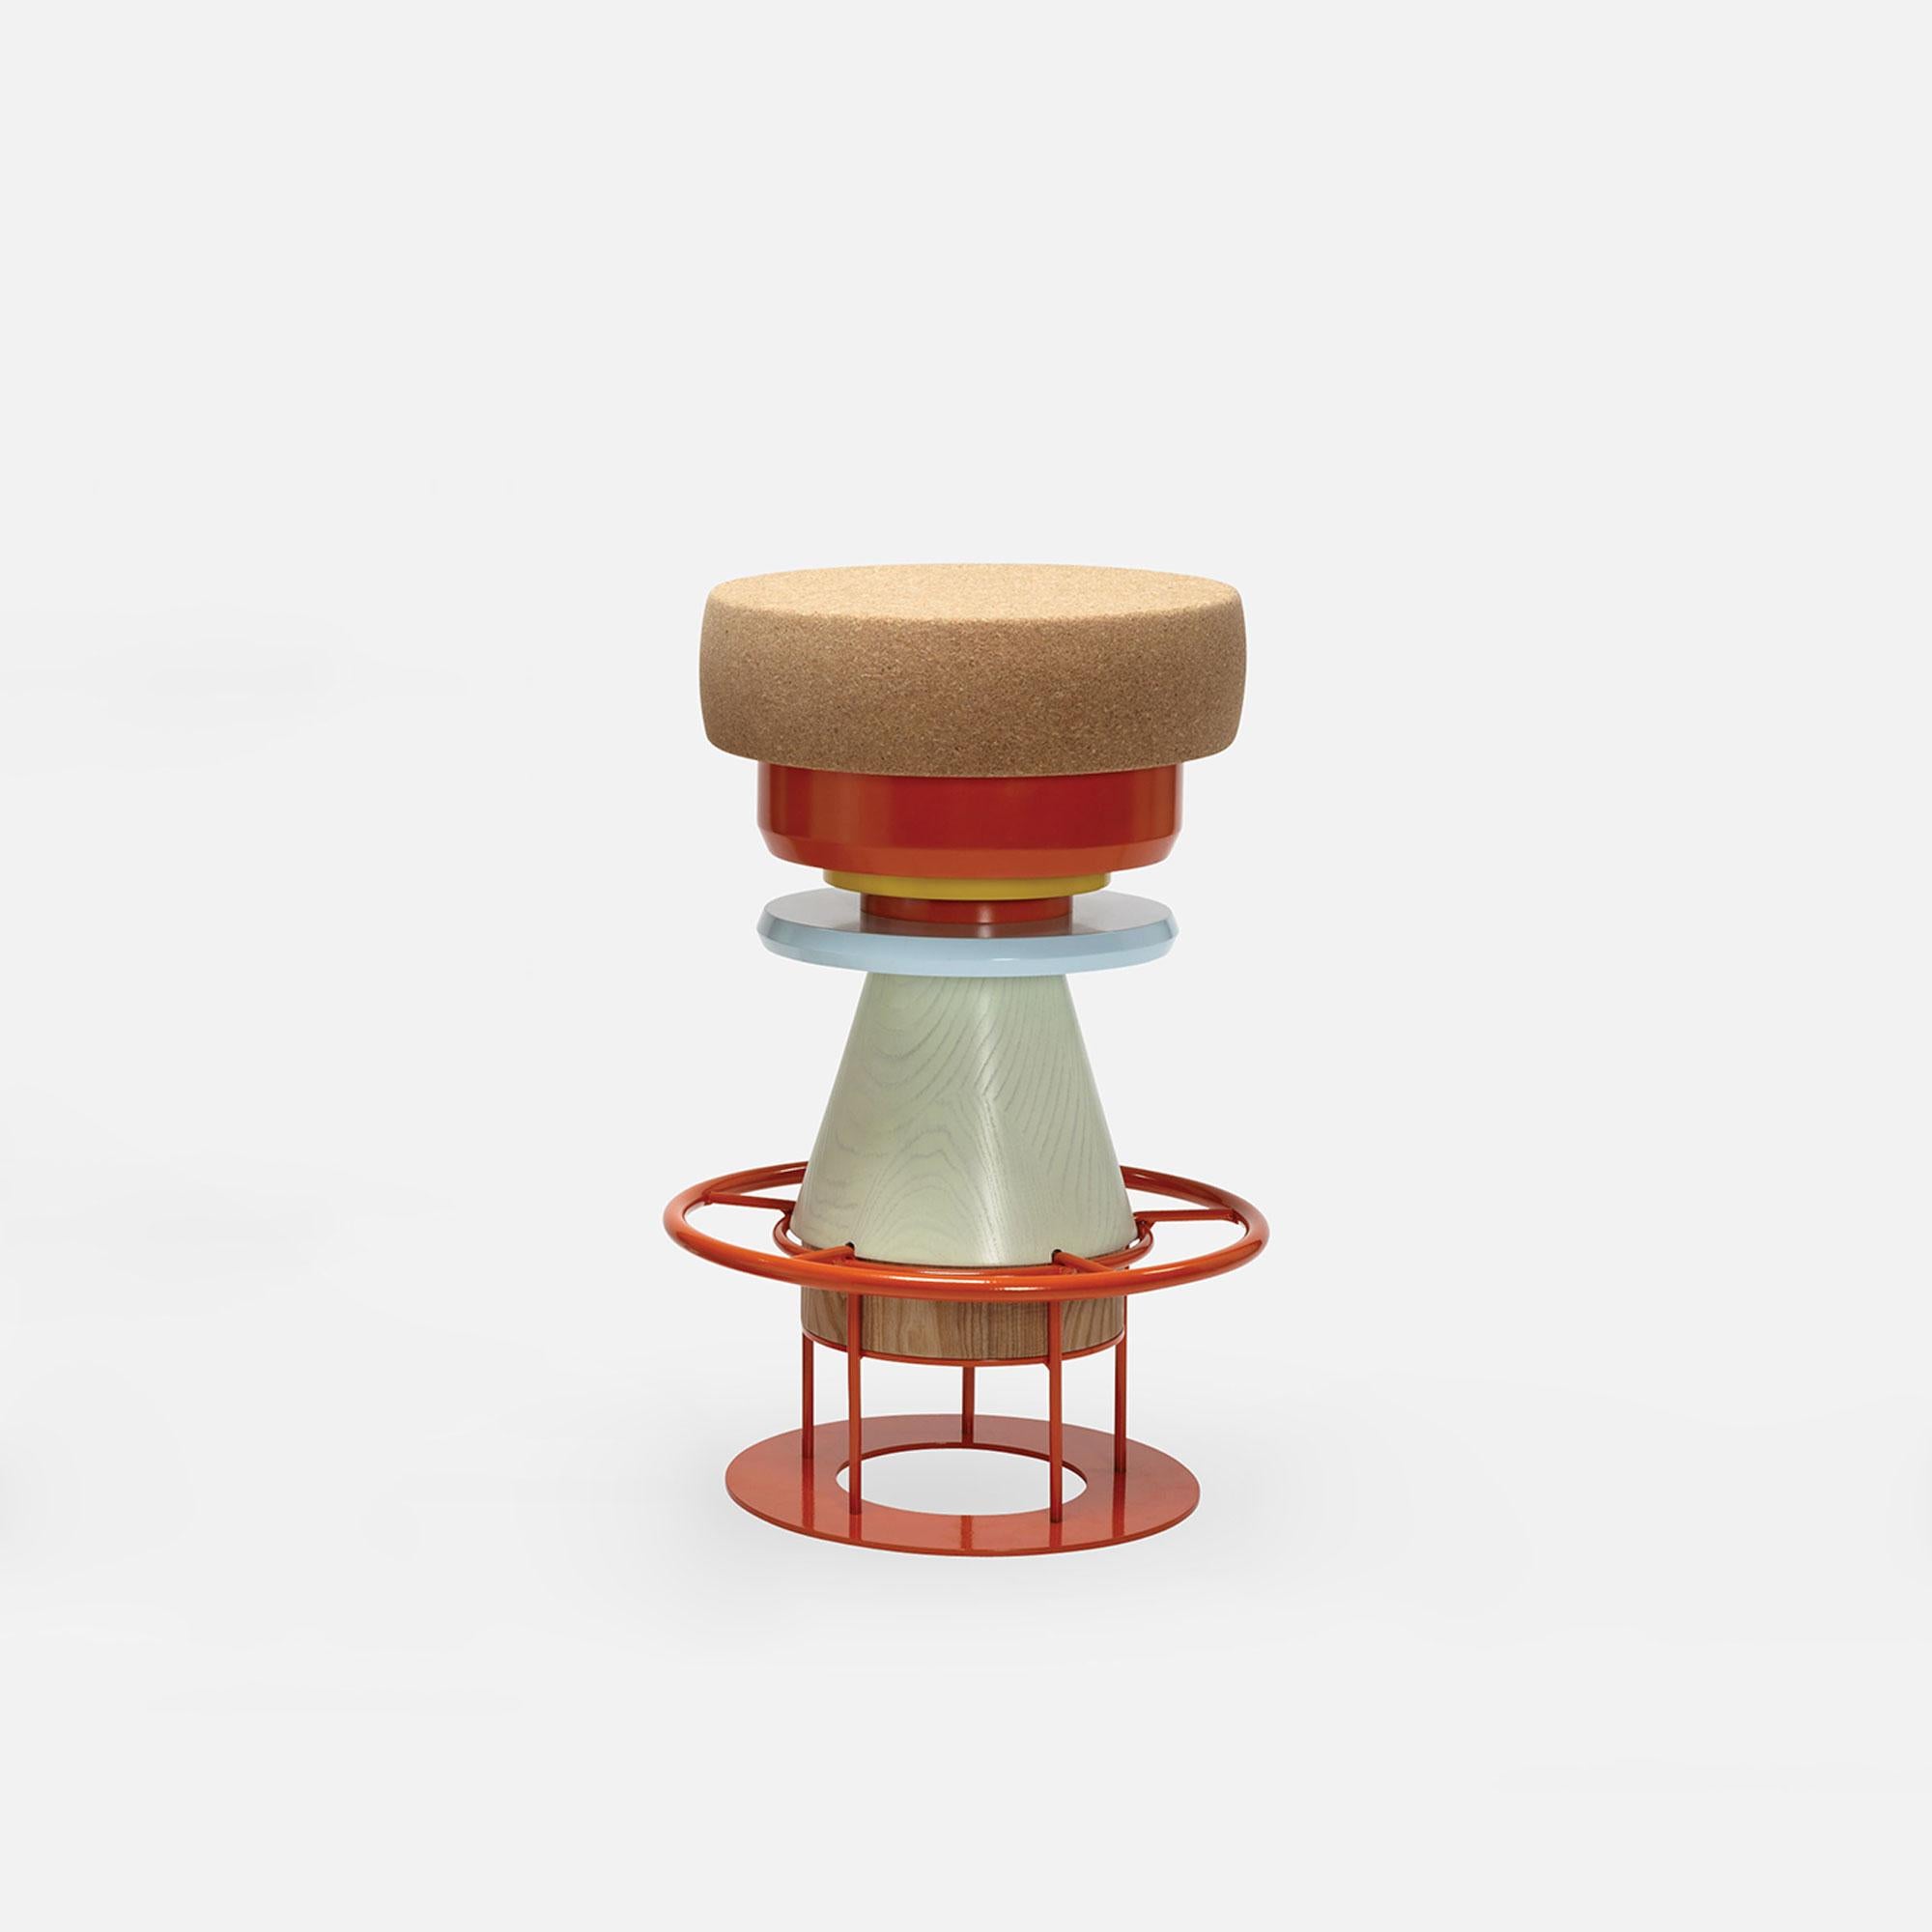 Medium Colorful tembo stool - Note Design Studio
Dimensions: D 36 x H 64 cm
Materials: Lacquered steel structure, solid wood (beech) and lacquered MDF, natural cork base.
Available in black and 3 sizes: H46, H64, H76 cm.

Tembo is a stool made